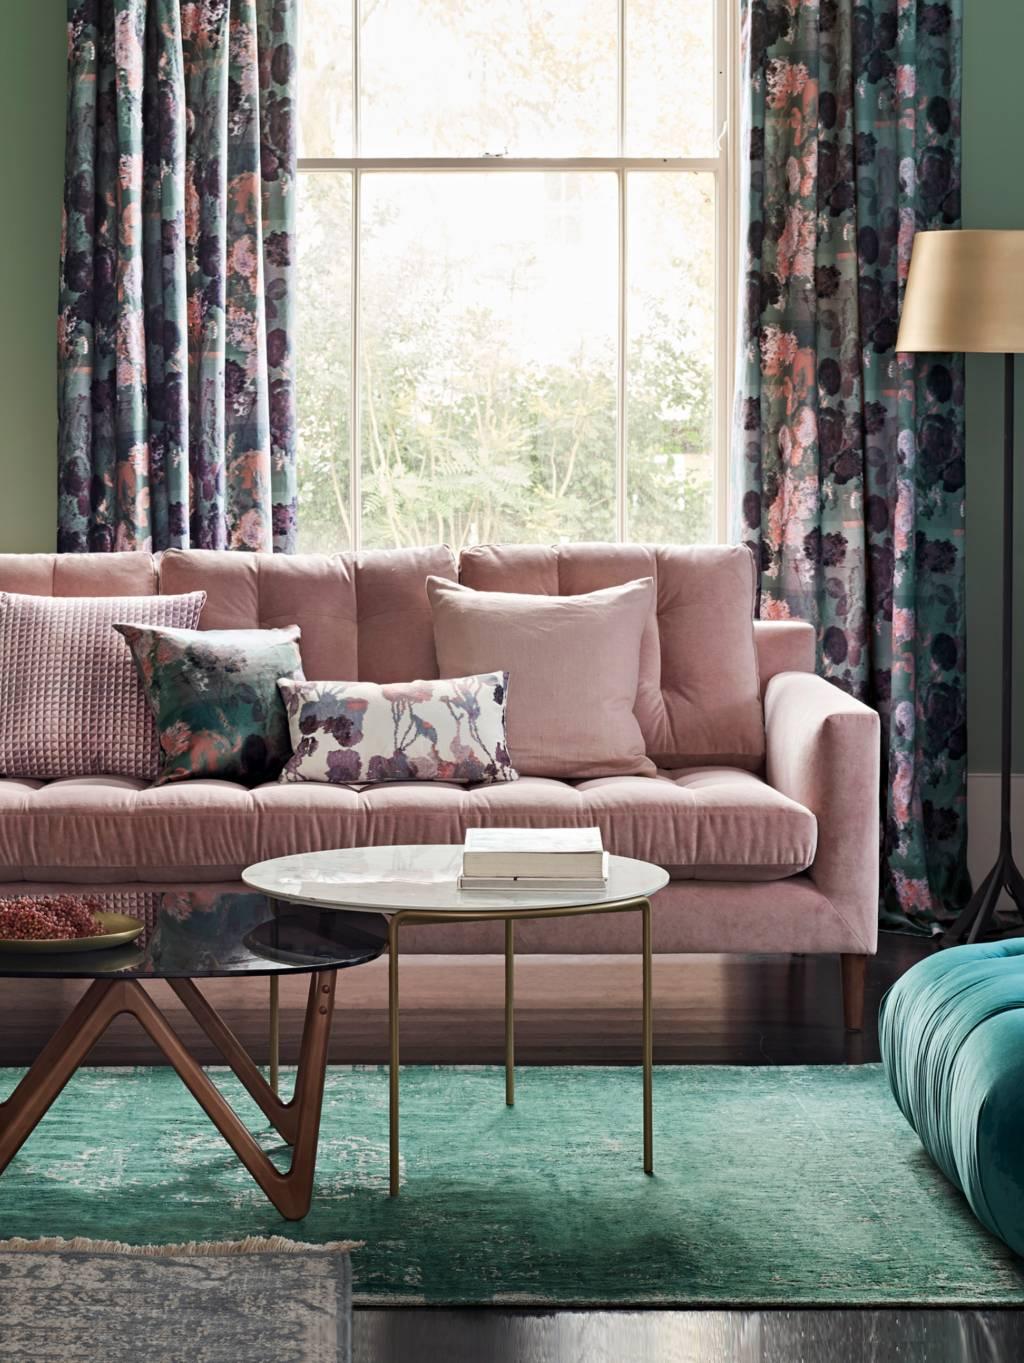 Pink and green living room inspiration| Today we're talking inspiration for adding green to your living room. Green is a really versatile colour to decorate your home with. But, which colours and tones work well? What kind of accessories work with green? This post gives you ideas for pulling together an elegant green colour palette and pieces for your home. Read more: kittyandb.com #greenlivingroom #interiordecoratinginspiration #greenaesthetic #pinksofa #greenwalls #Pinkandgreen